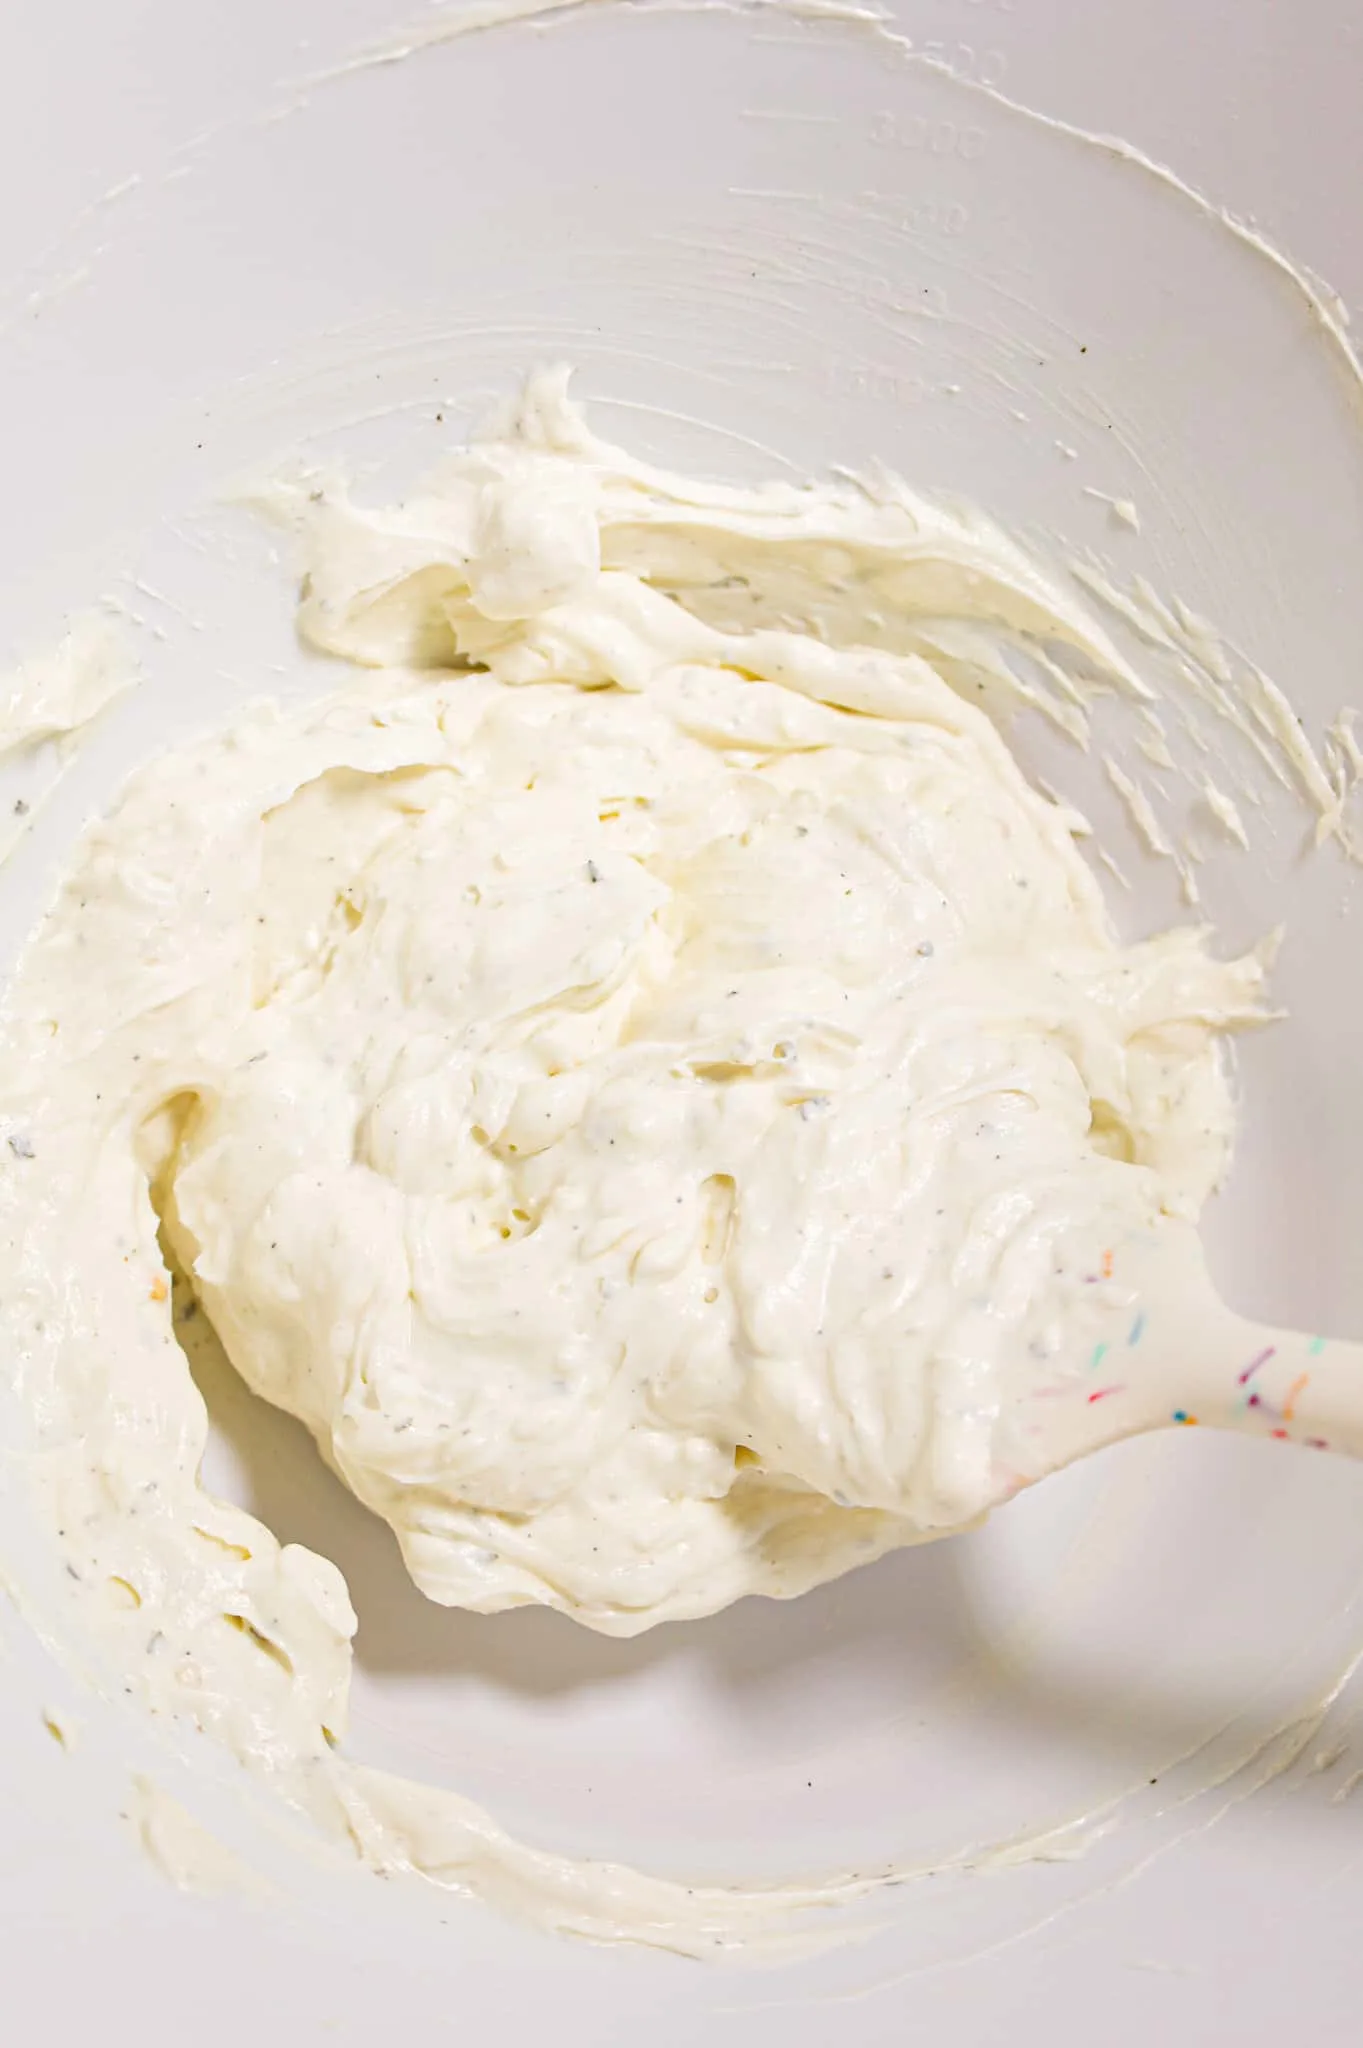 cream cheese and sour cream being stirred together in a mixing bowl